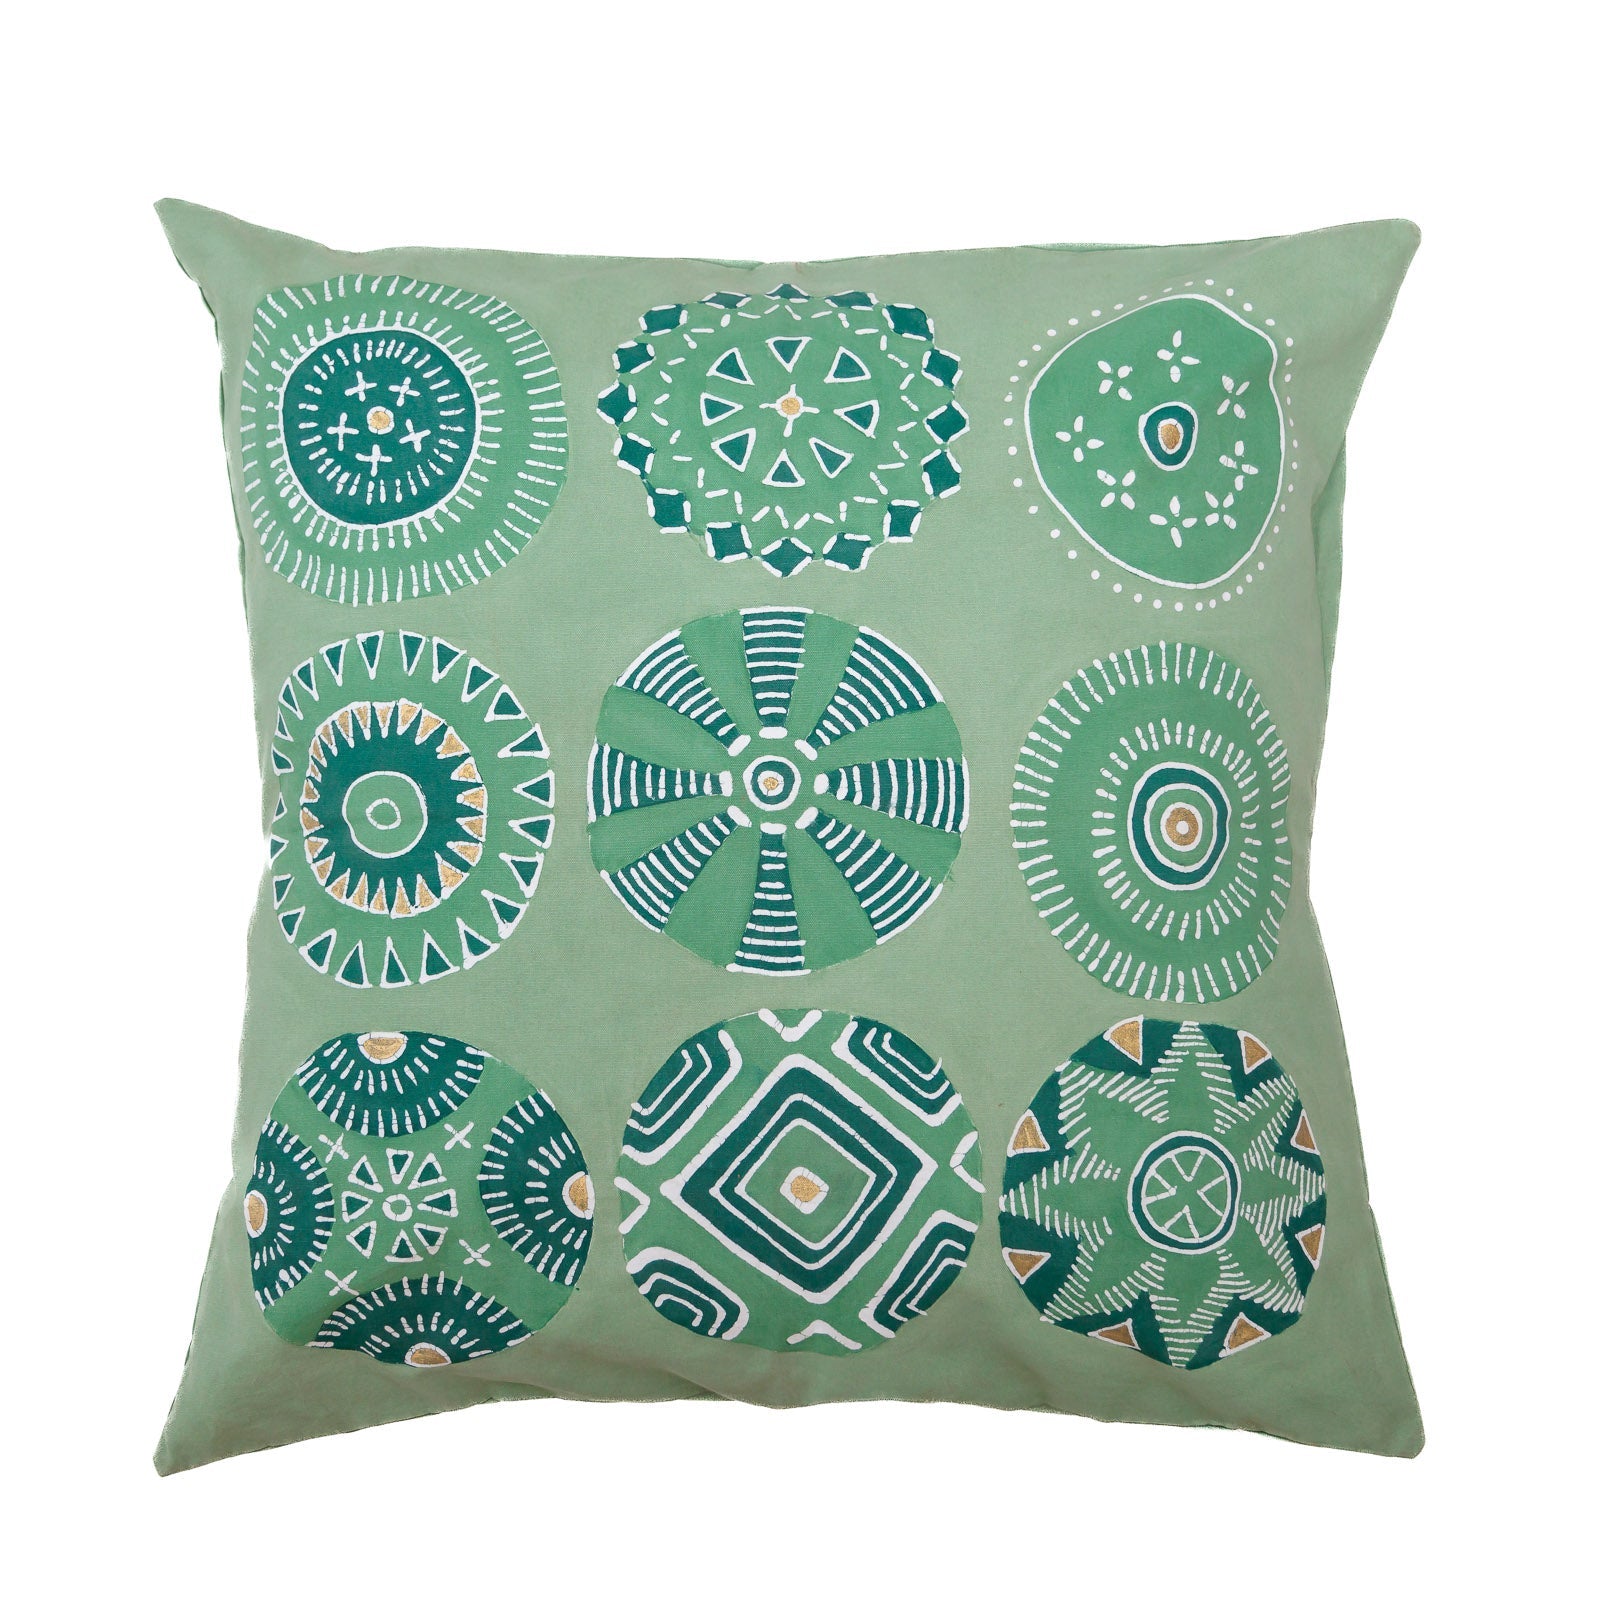 Kuosi Jade Cushion Cover - Hand Painted by TRIBAL TEXTILES - Handcrafted Home Decor Interiors - African Made